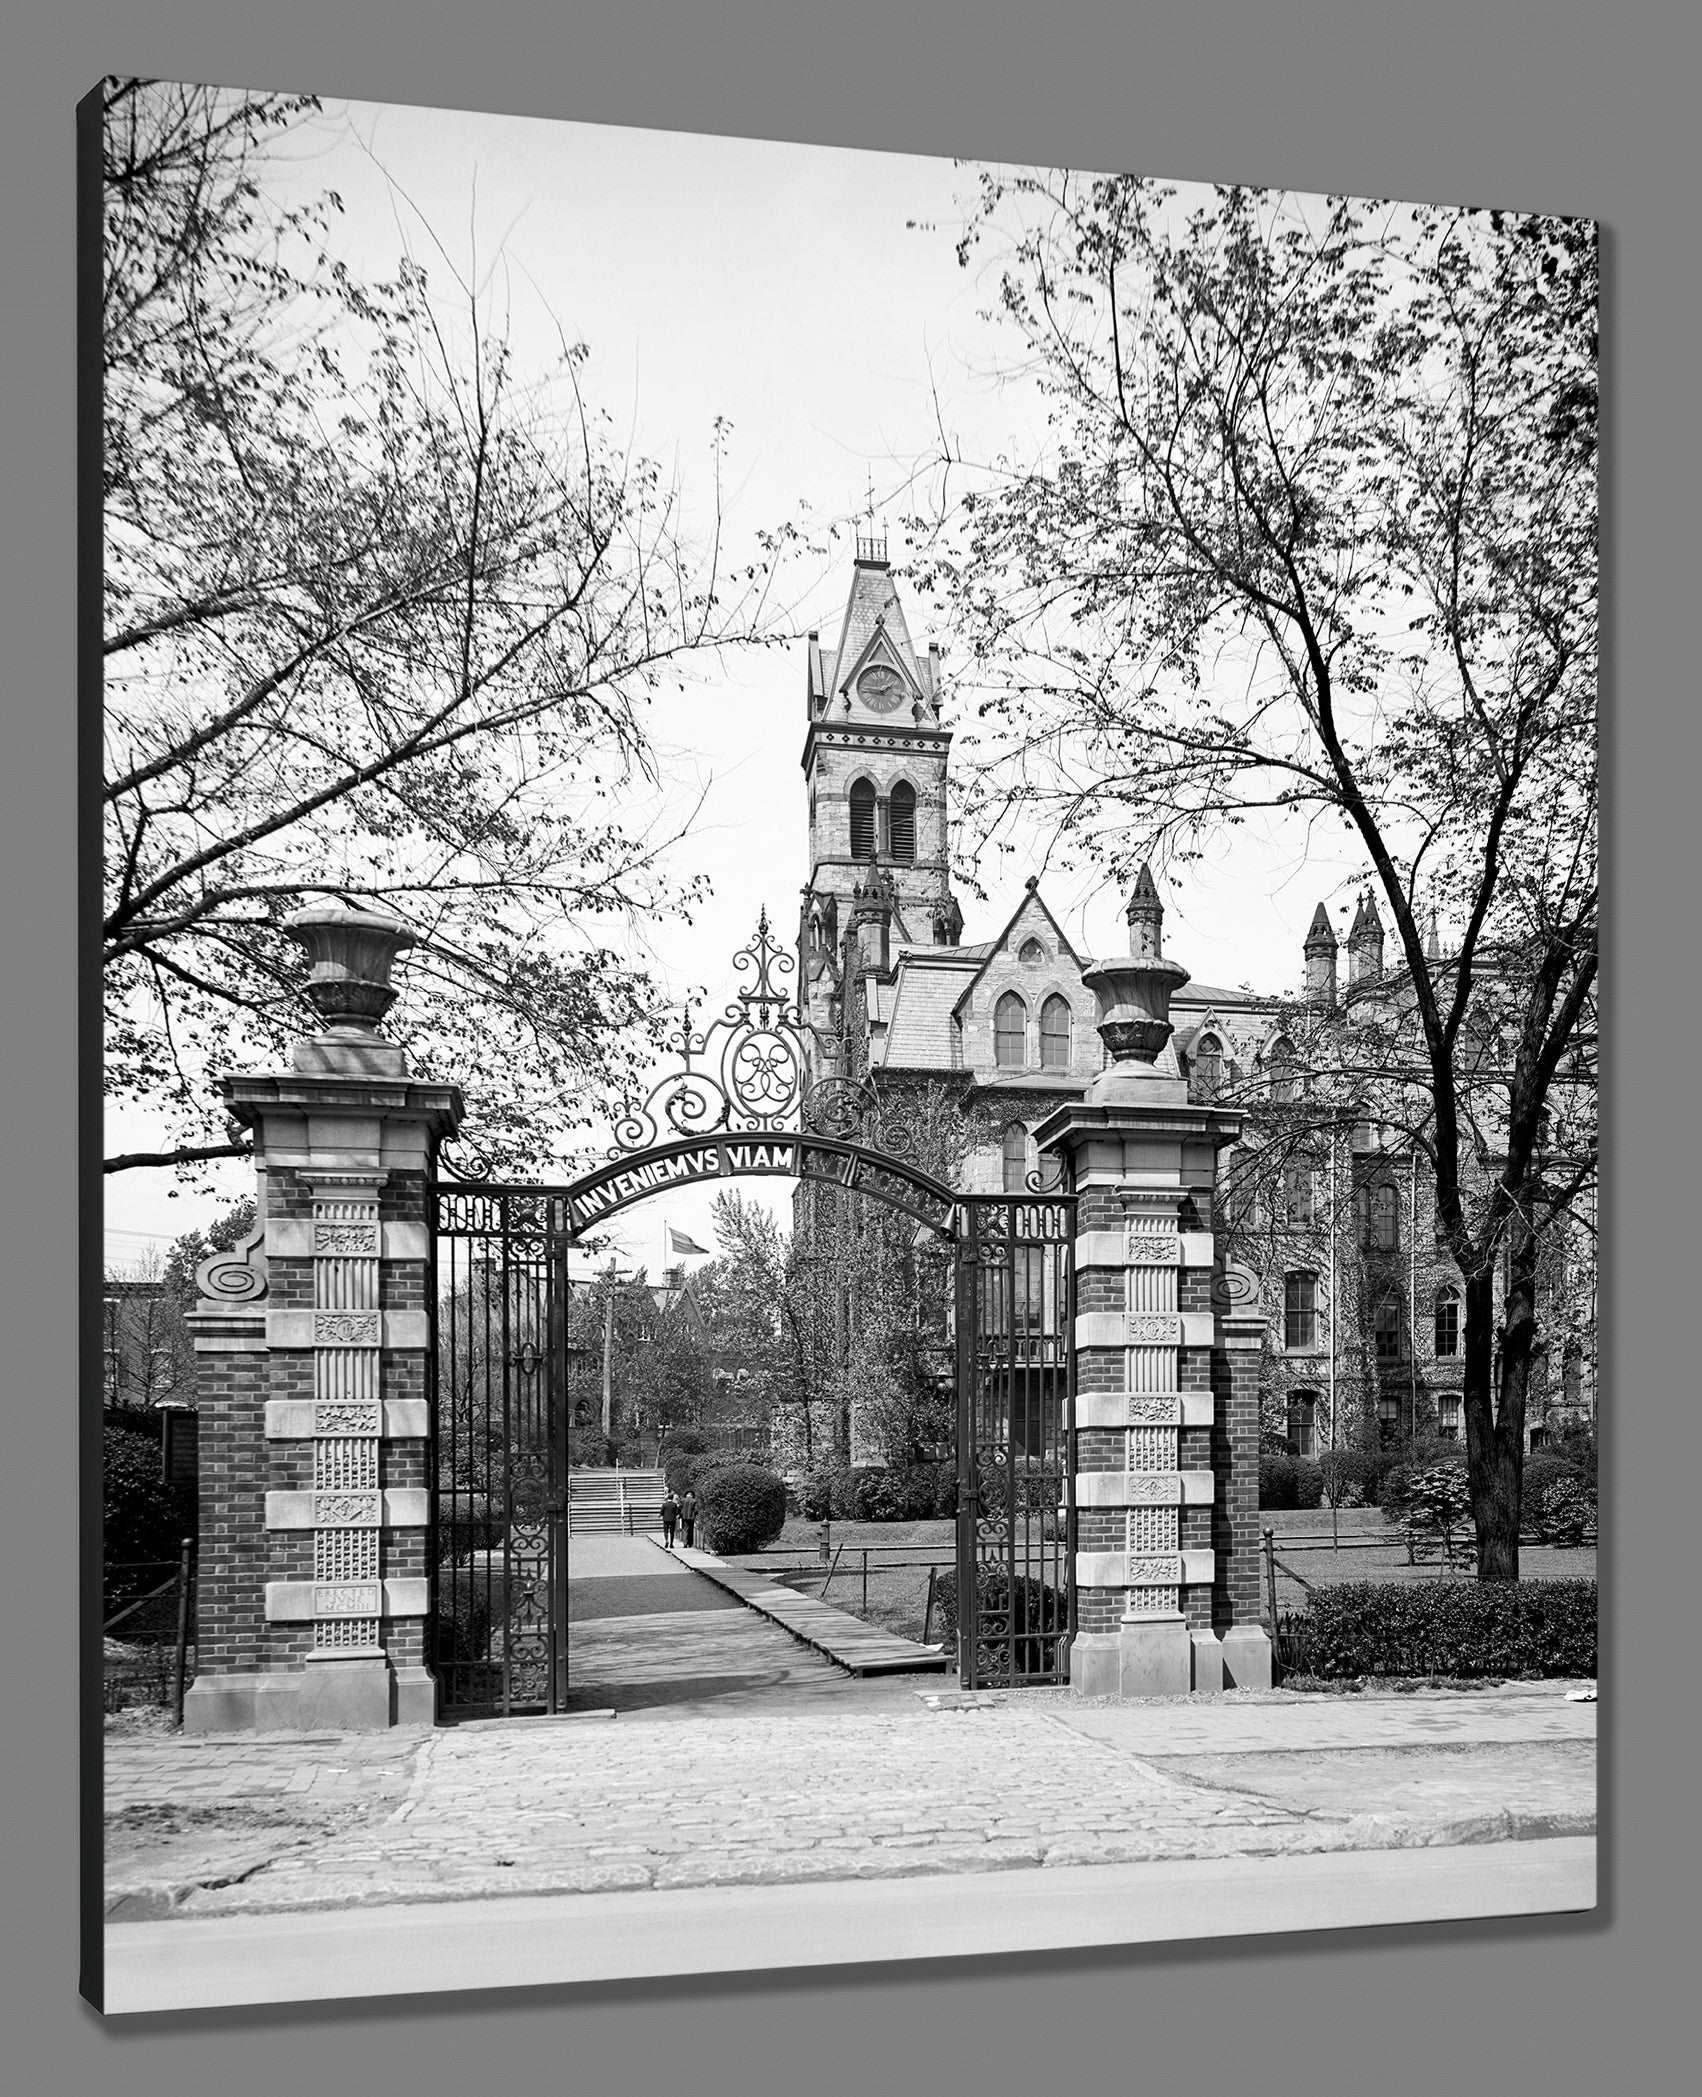 A fine art canvas print reproduction of a vintage photograph of the University of Pennsylvania's College Tower